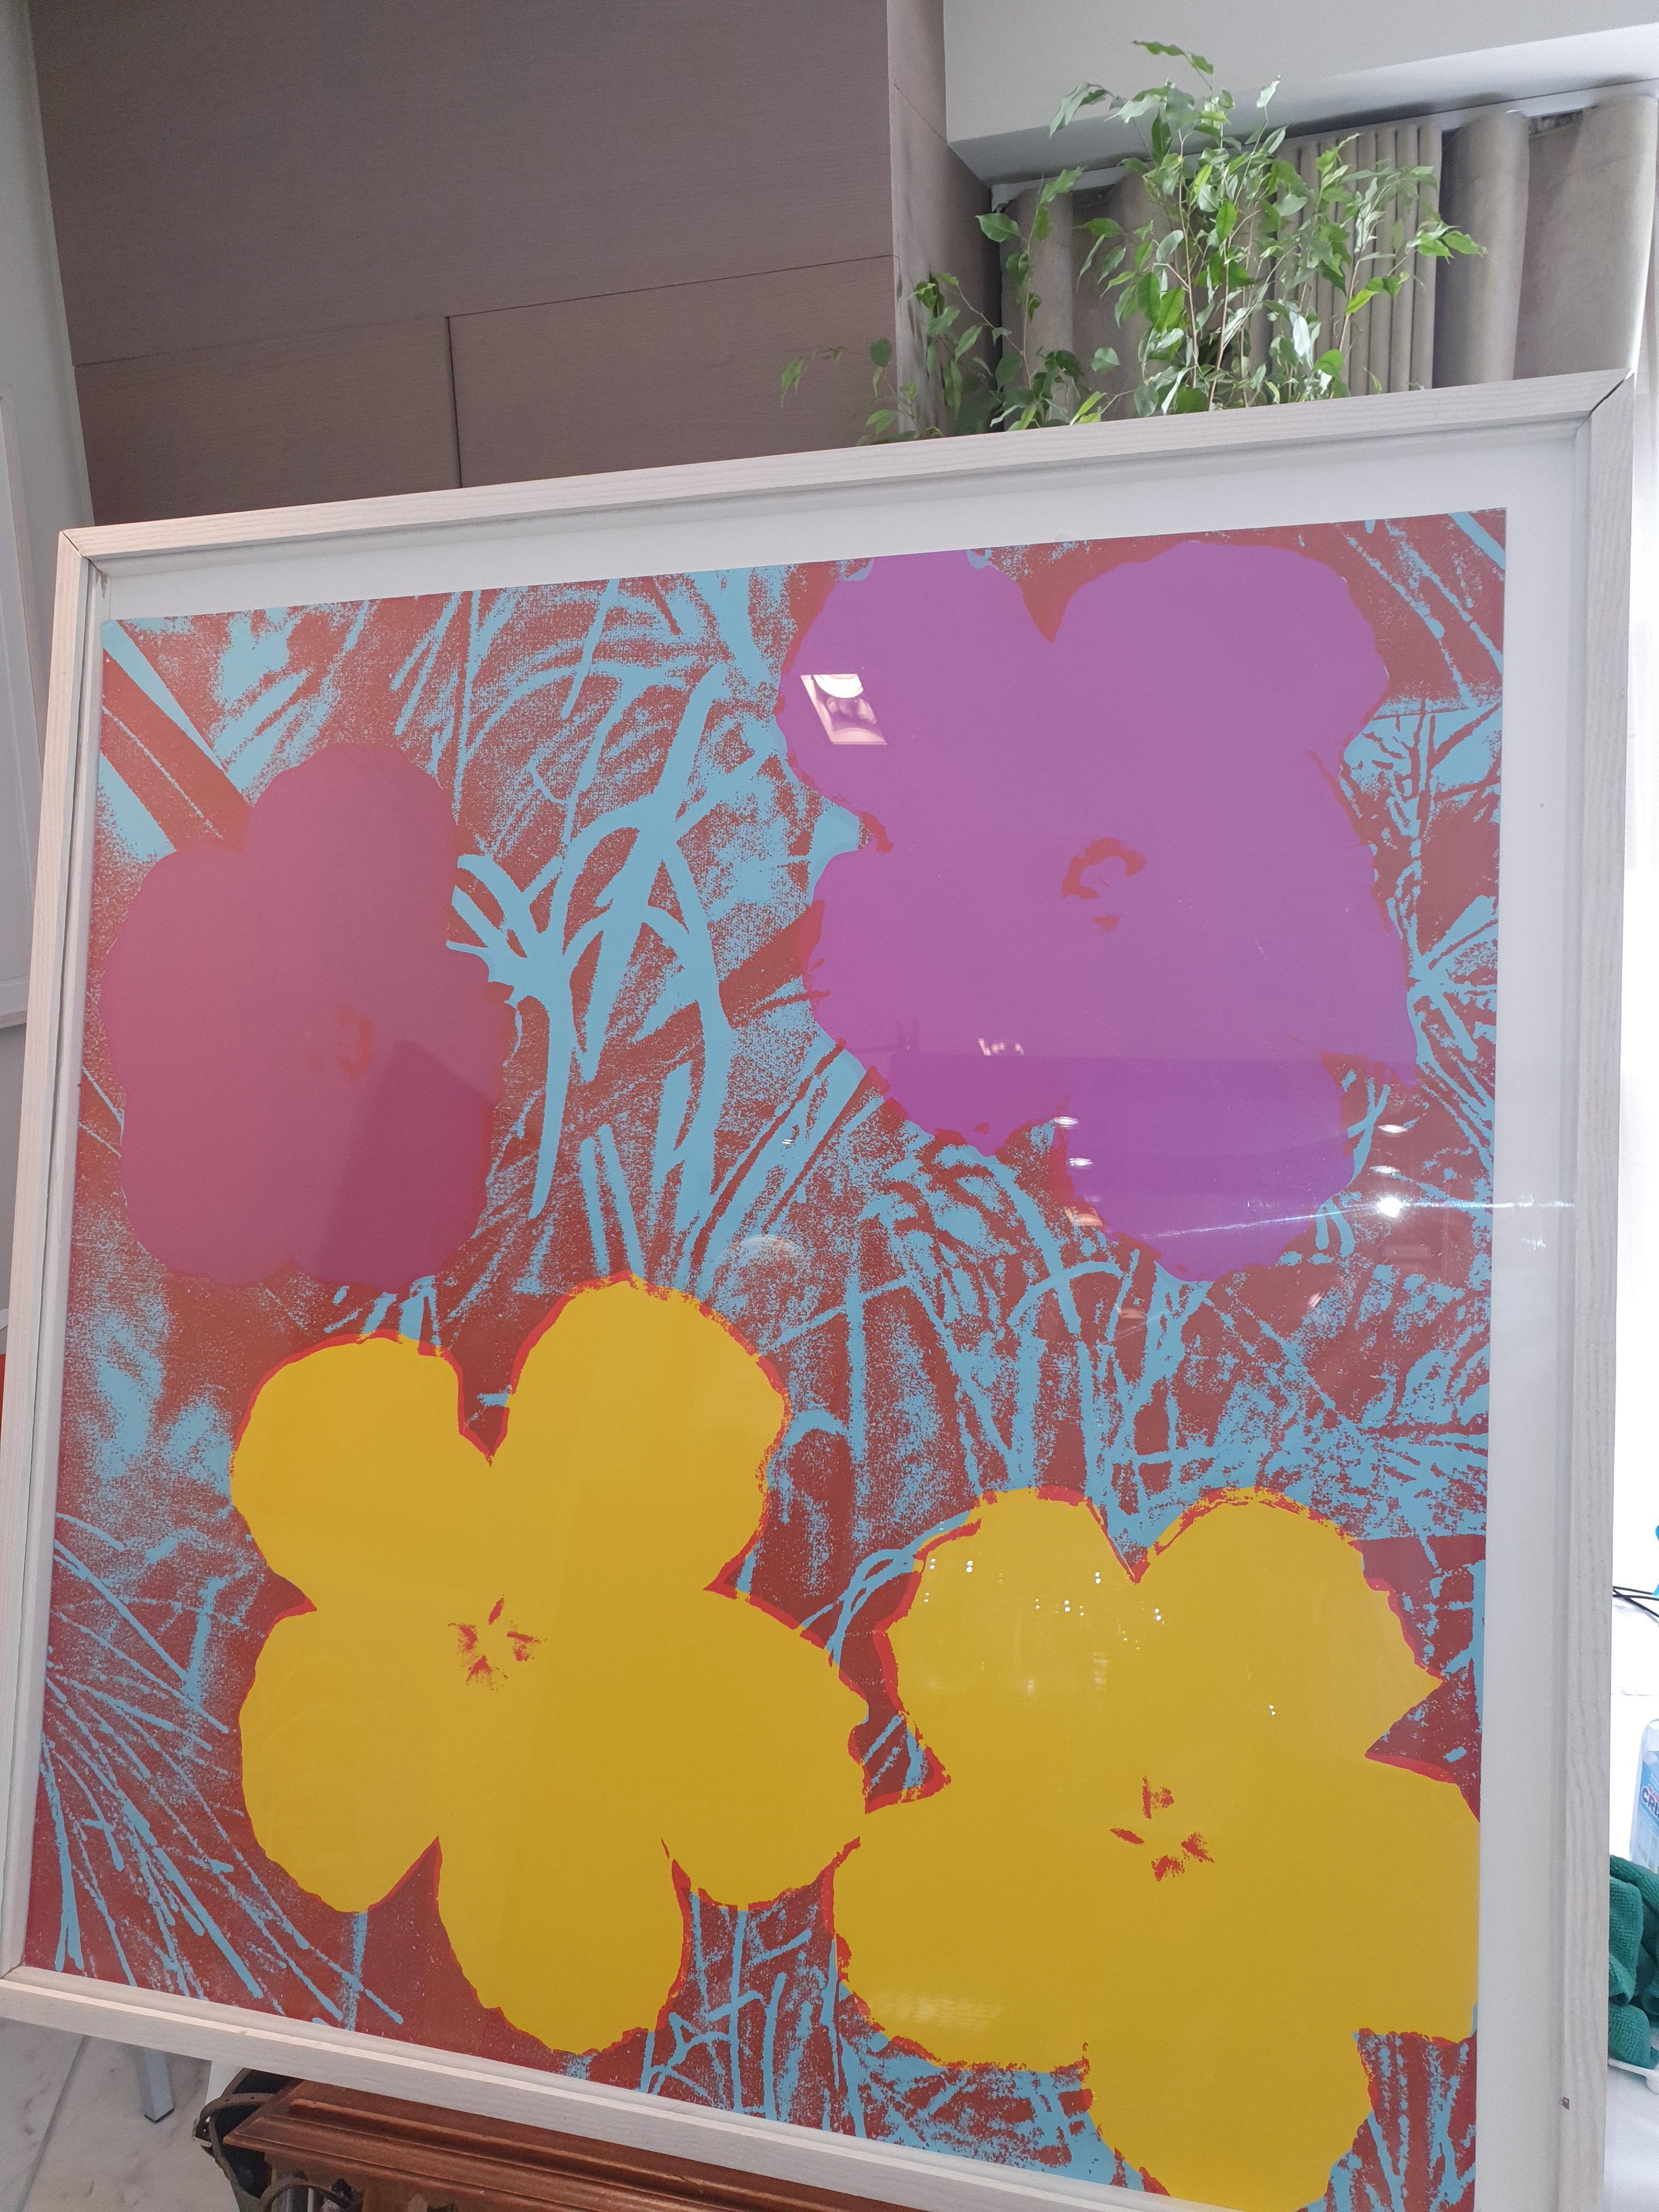 'Flowers' presumably by Andy Warhol is a beautiful serigraph unnumbered and signed and dated on the verso. Printed by Salvatore Silkscreen Co, Inc., New York, published by Factory Additions, New York Edition of 250 and 26 AP. 

This piece is apart